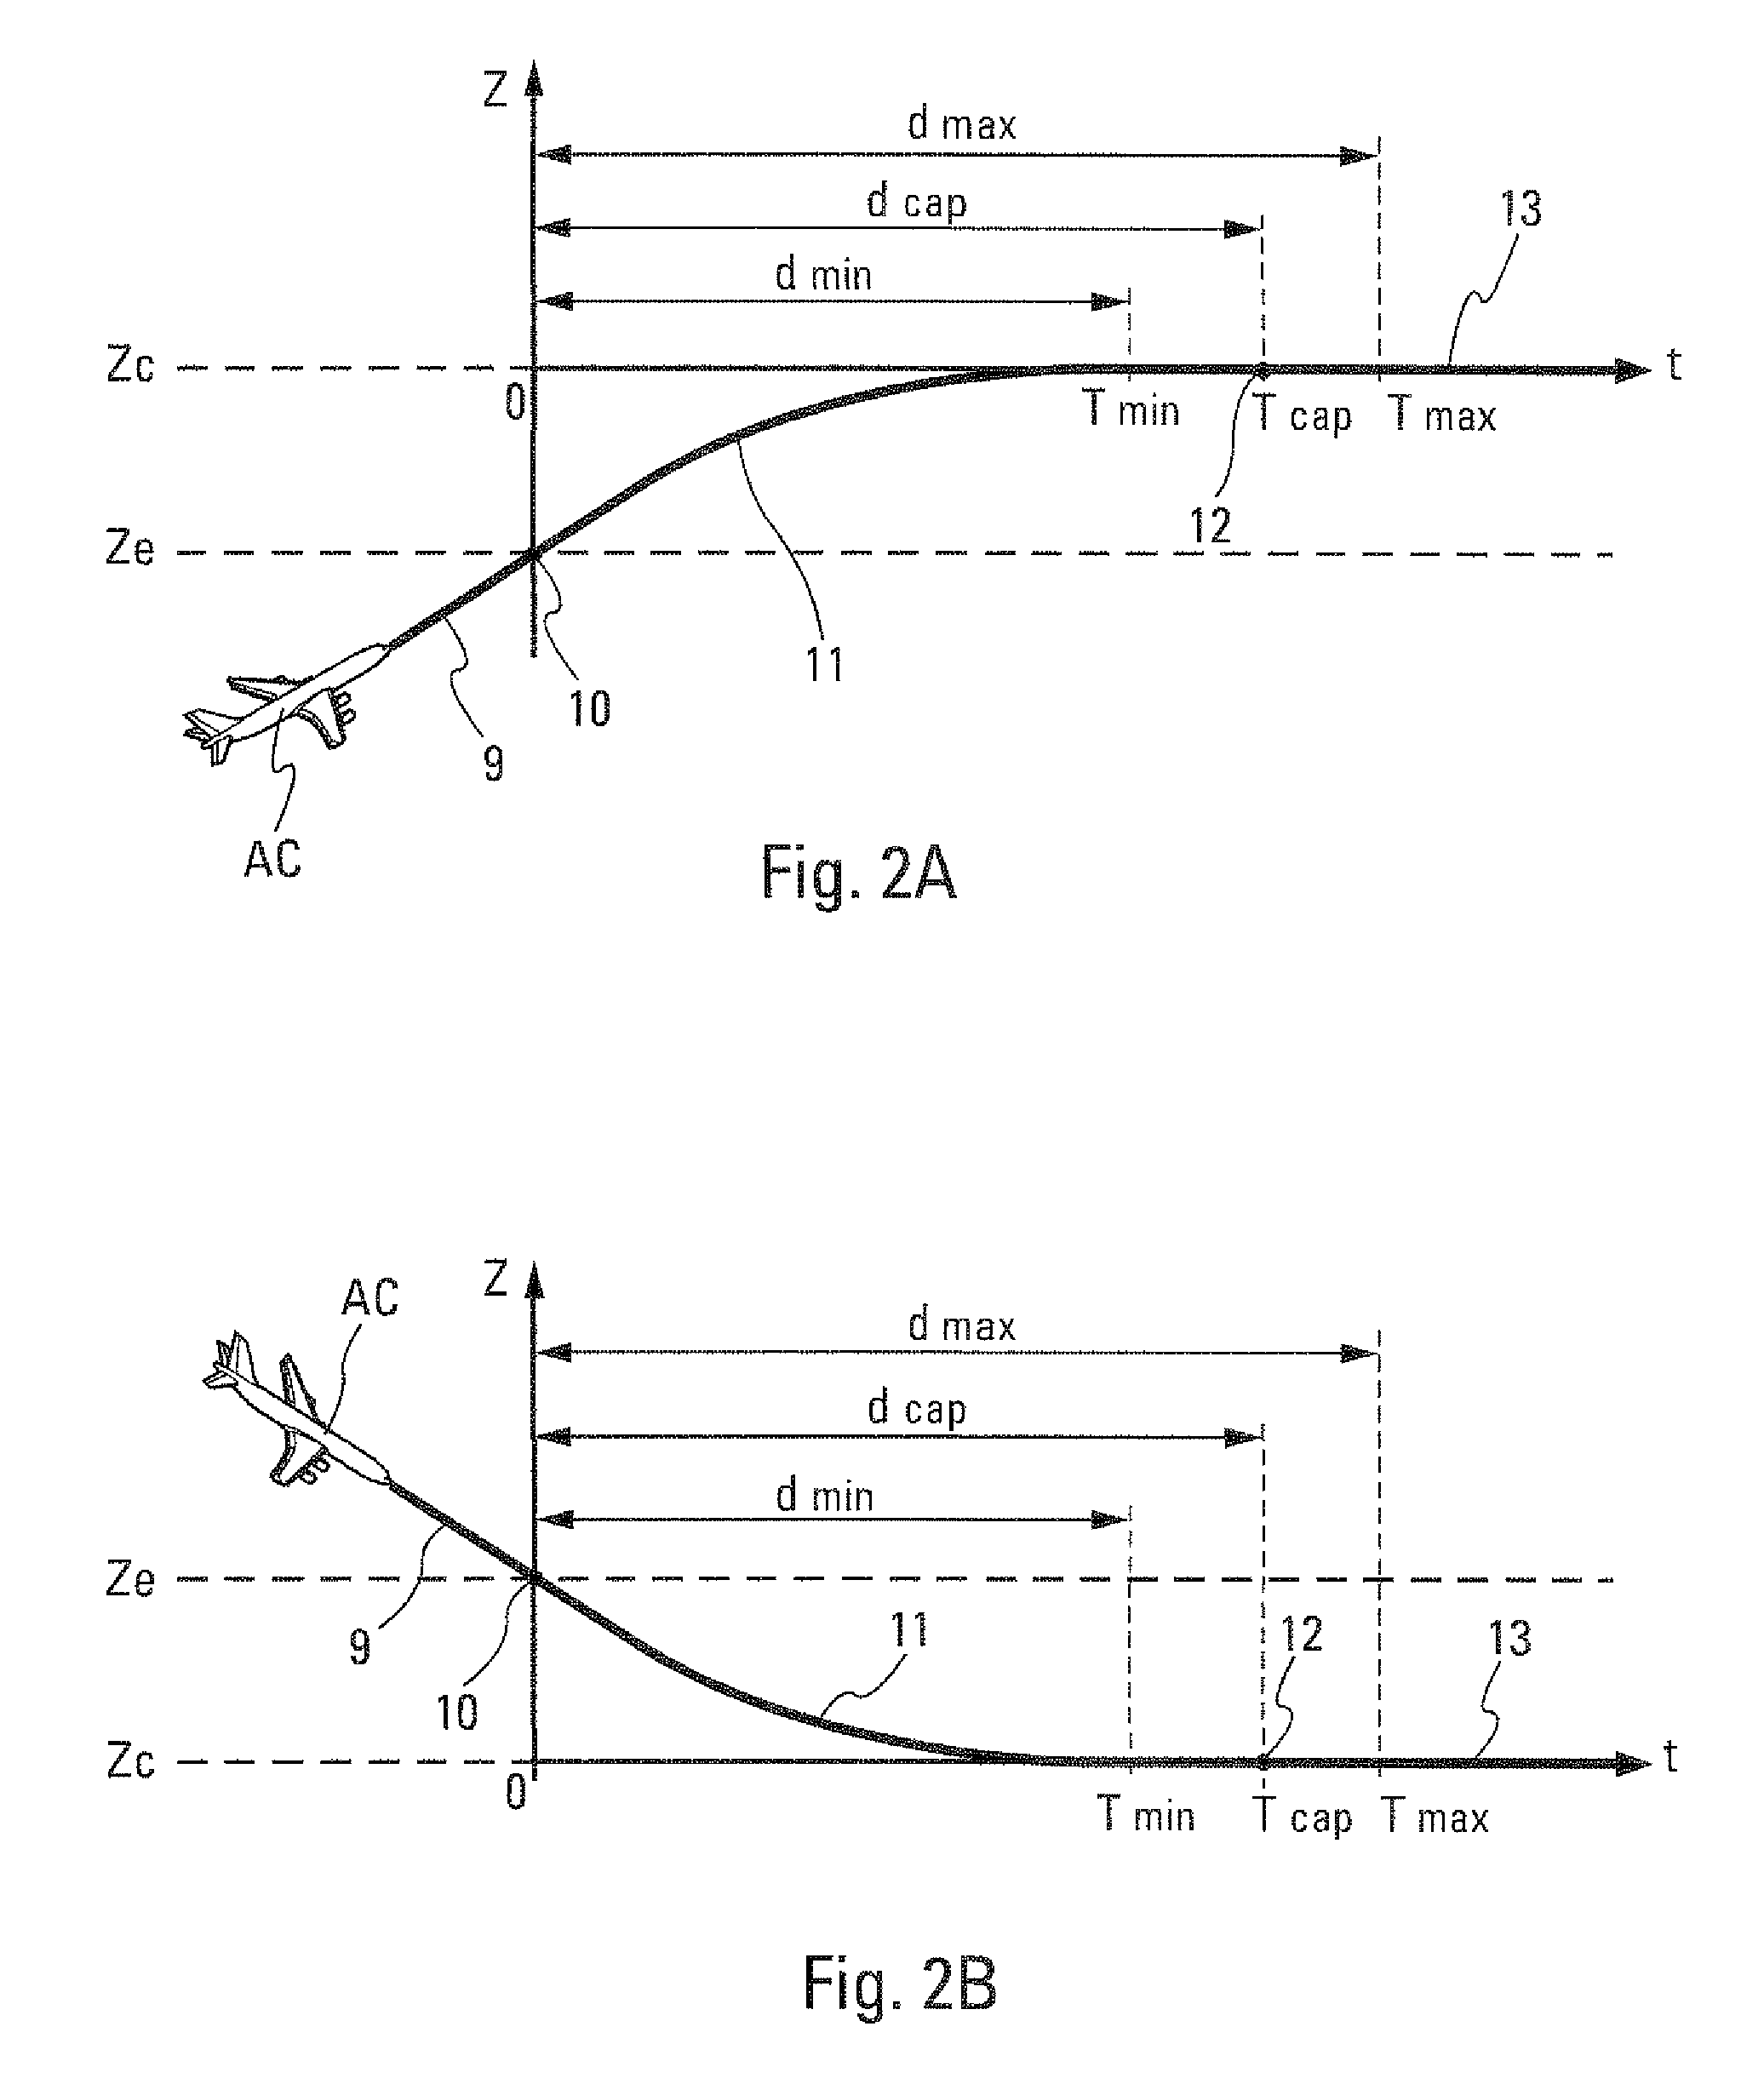 Method and device for preventing useless alarms generated by an anti-collision system on board an airplane